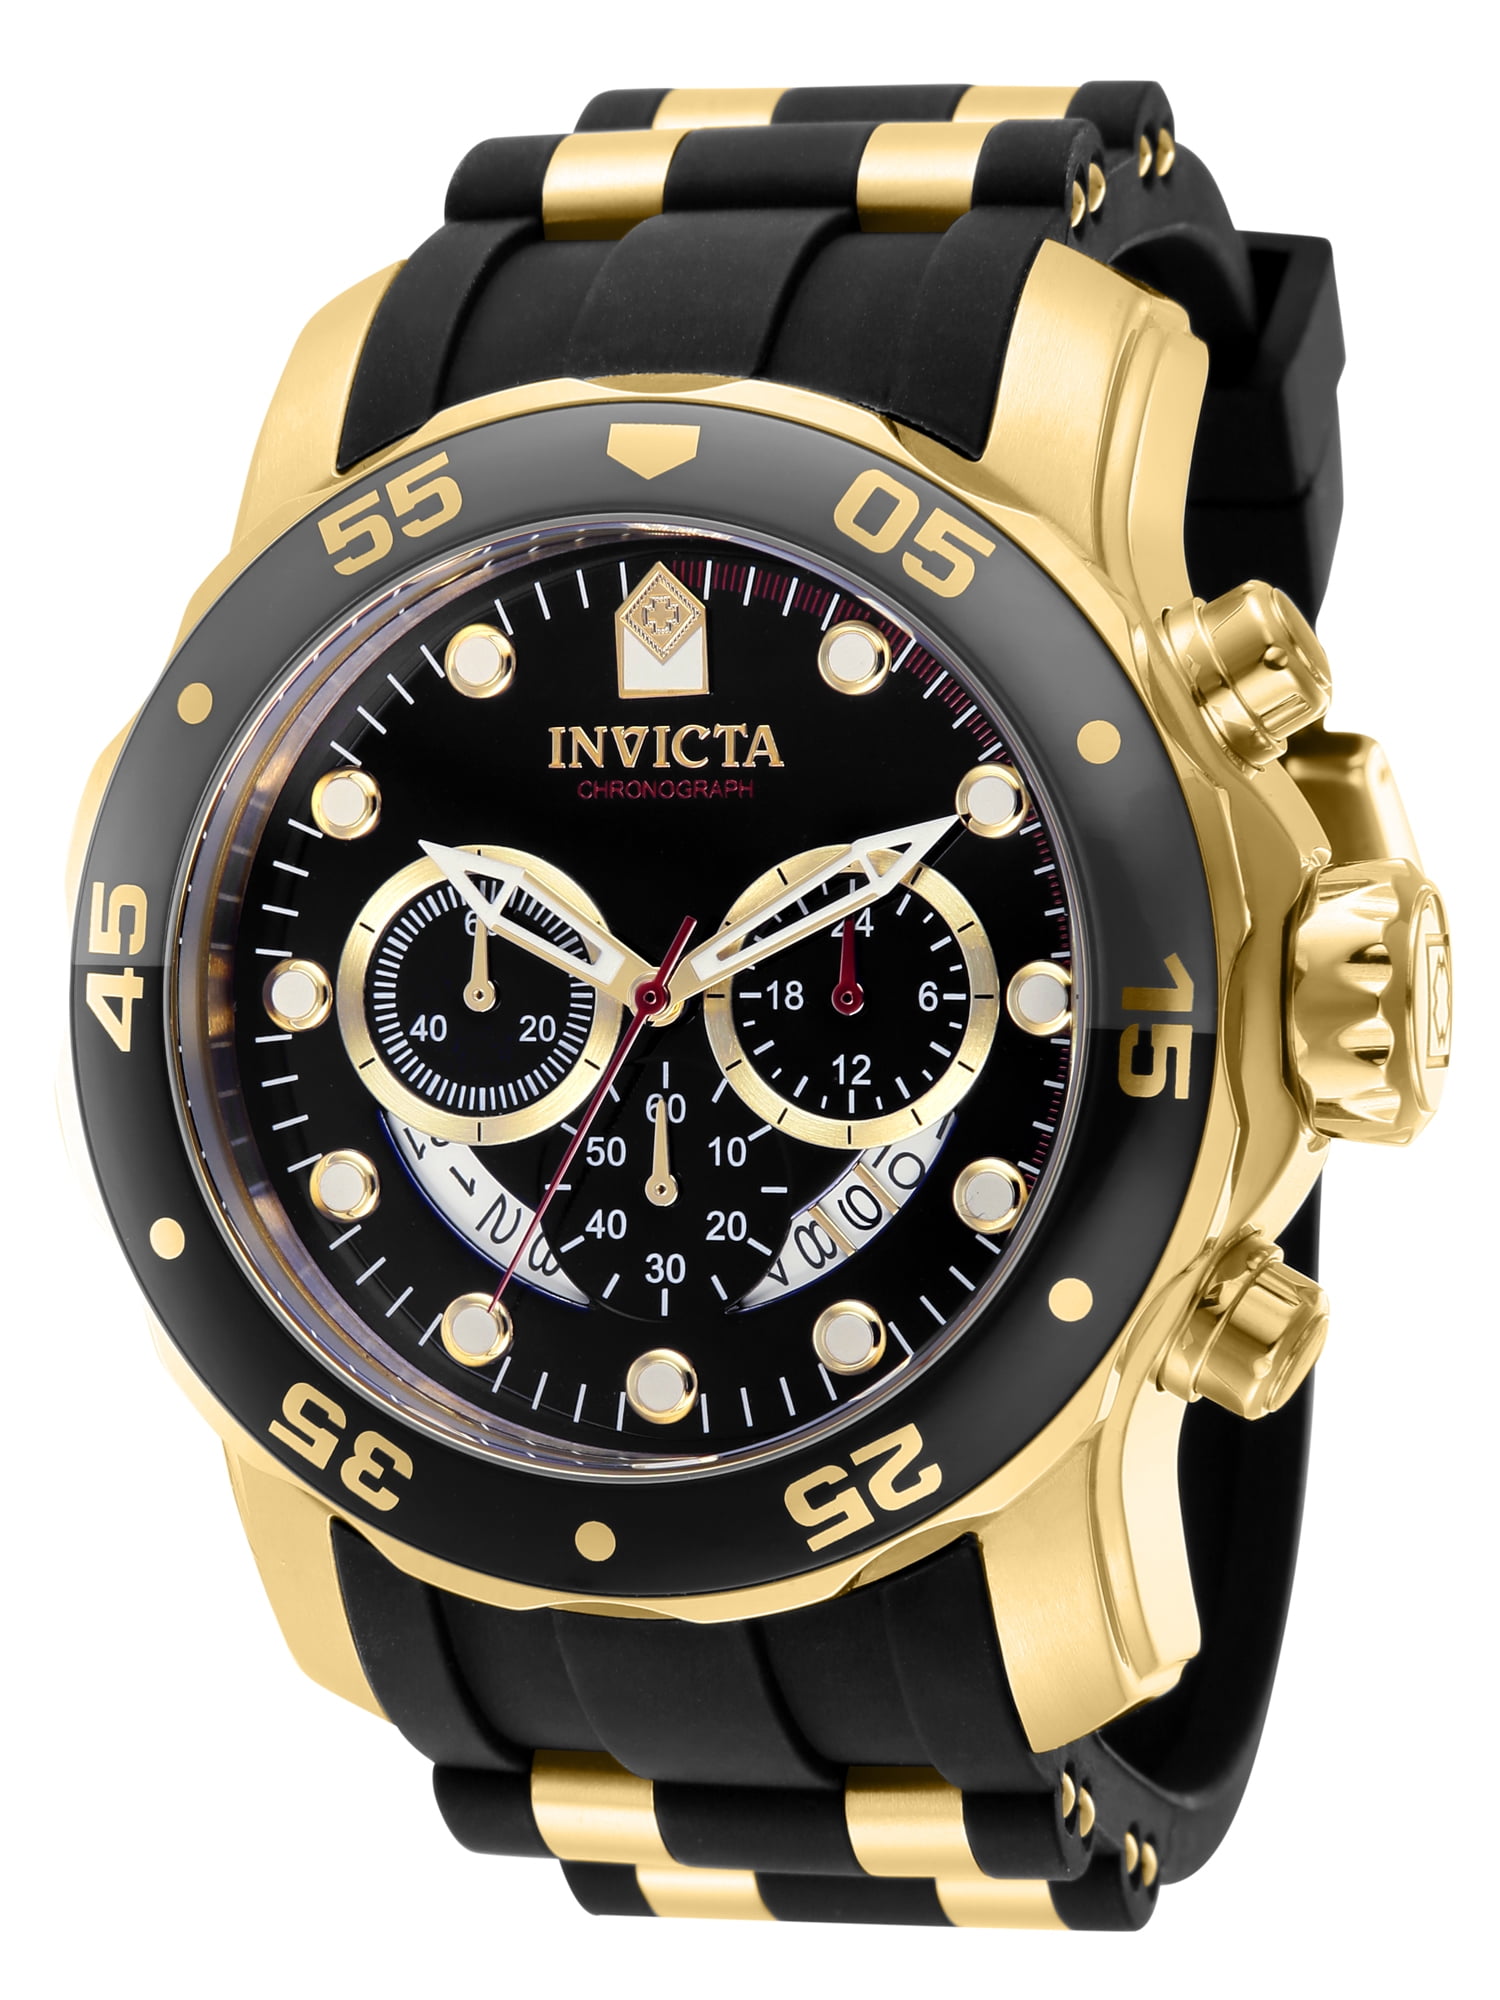 Invicta Pro Diver Men 48mm Stainless Steel Black dial Chronograph Watch Walmart.com